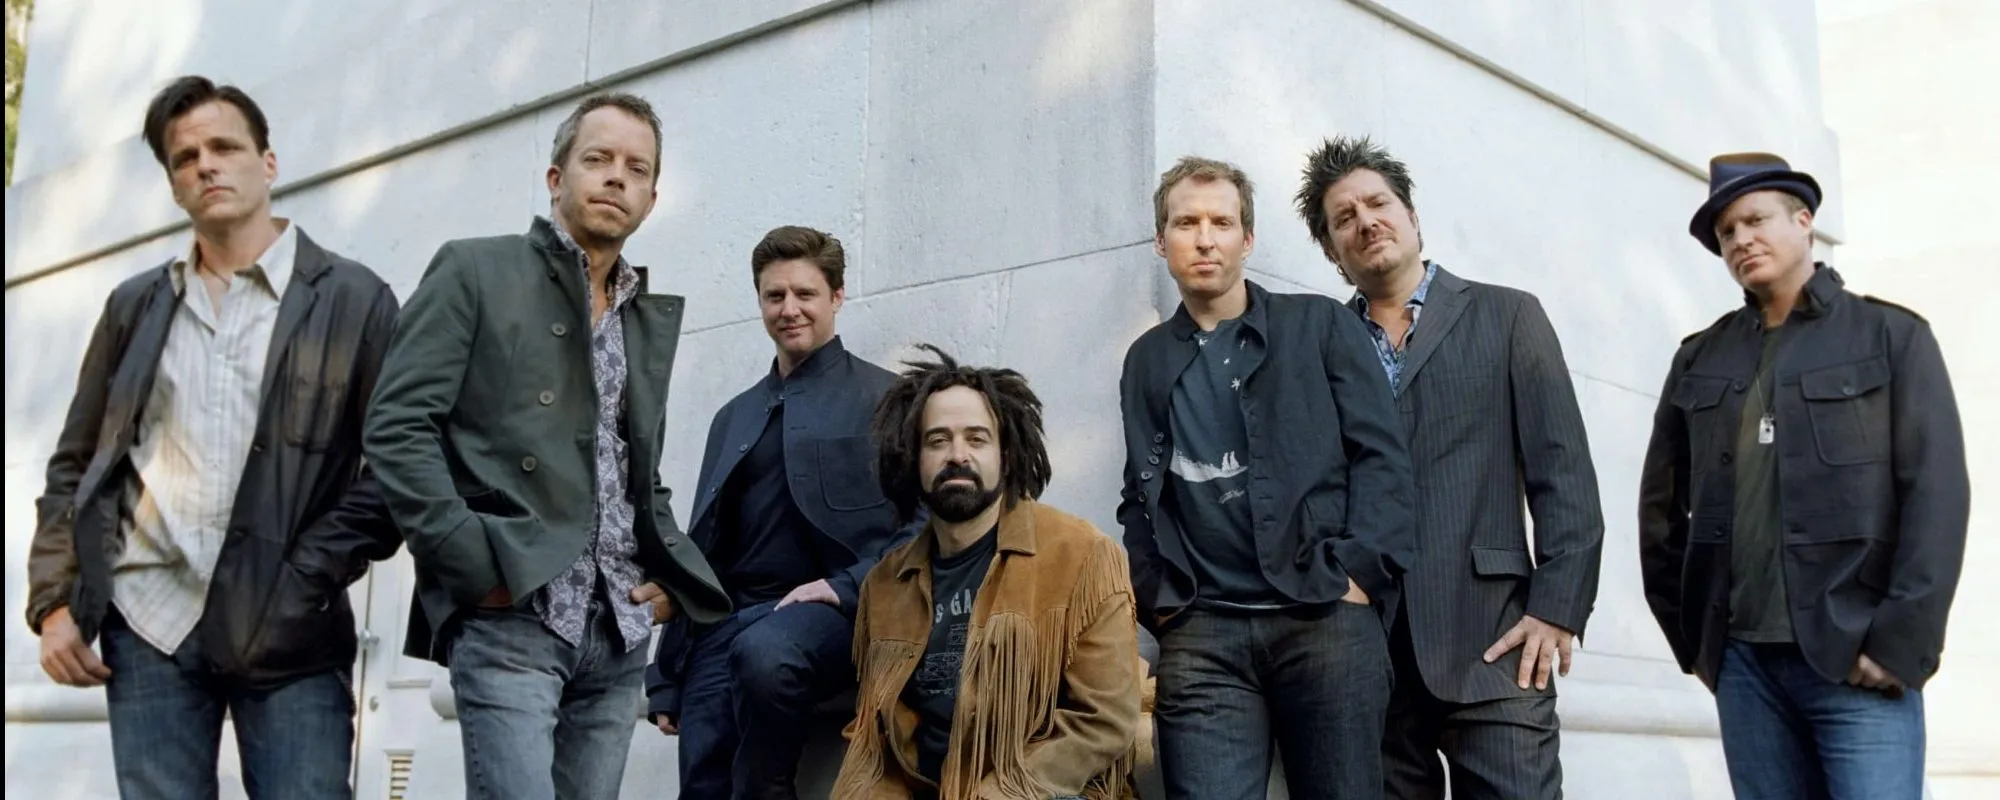 Behind the Meaning and History of the Band Name: Counting Crows